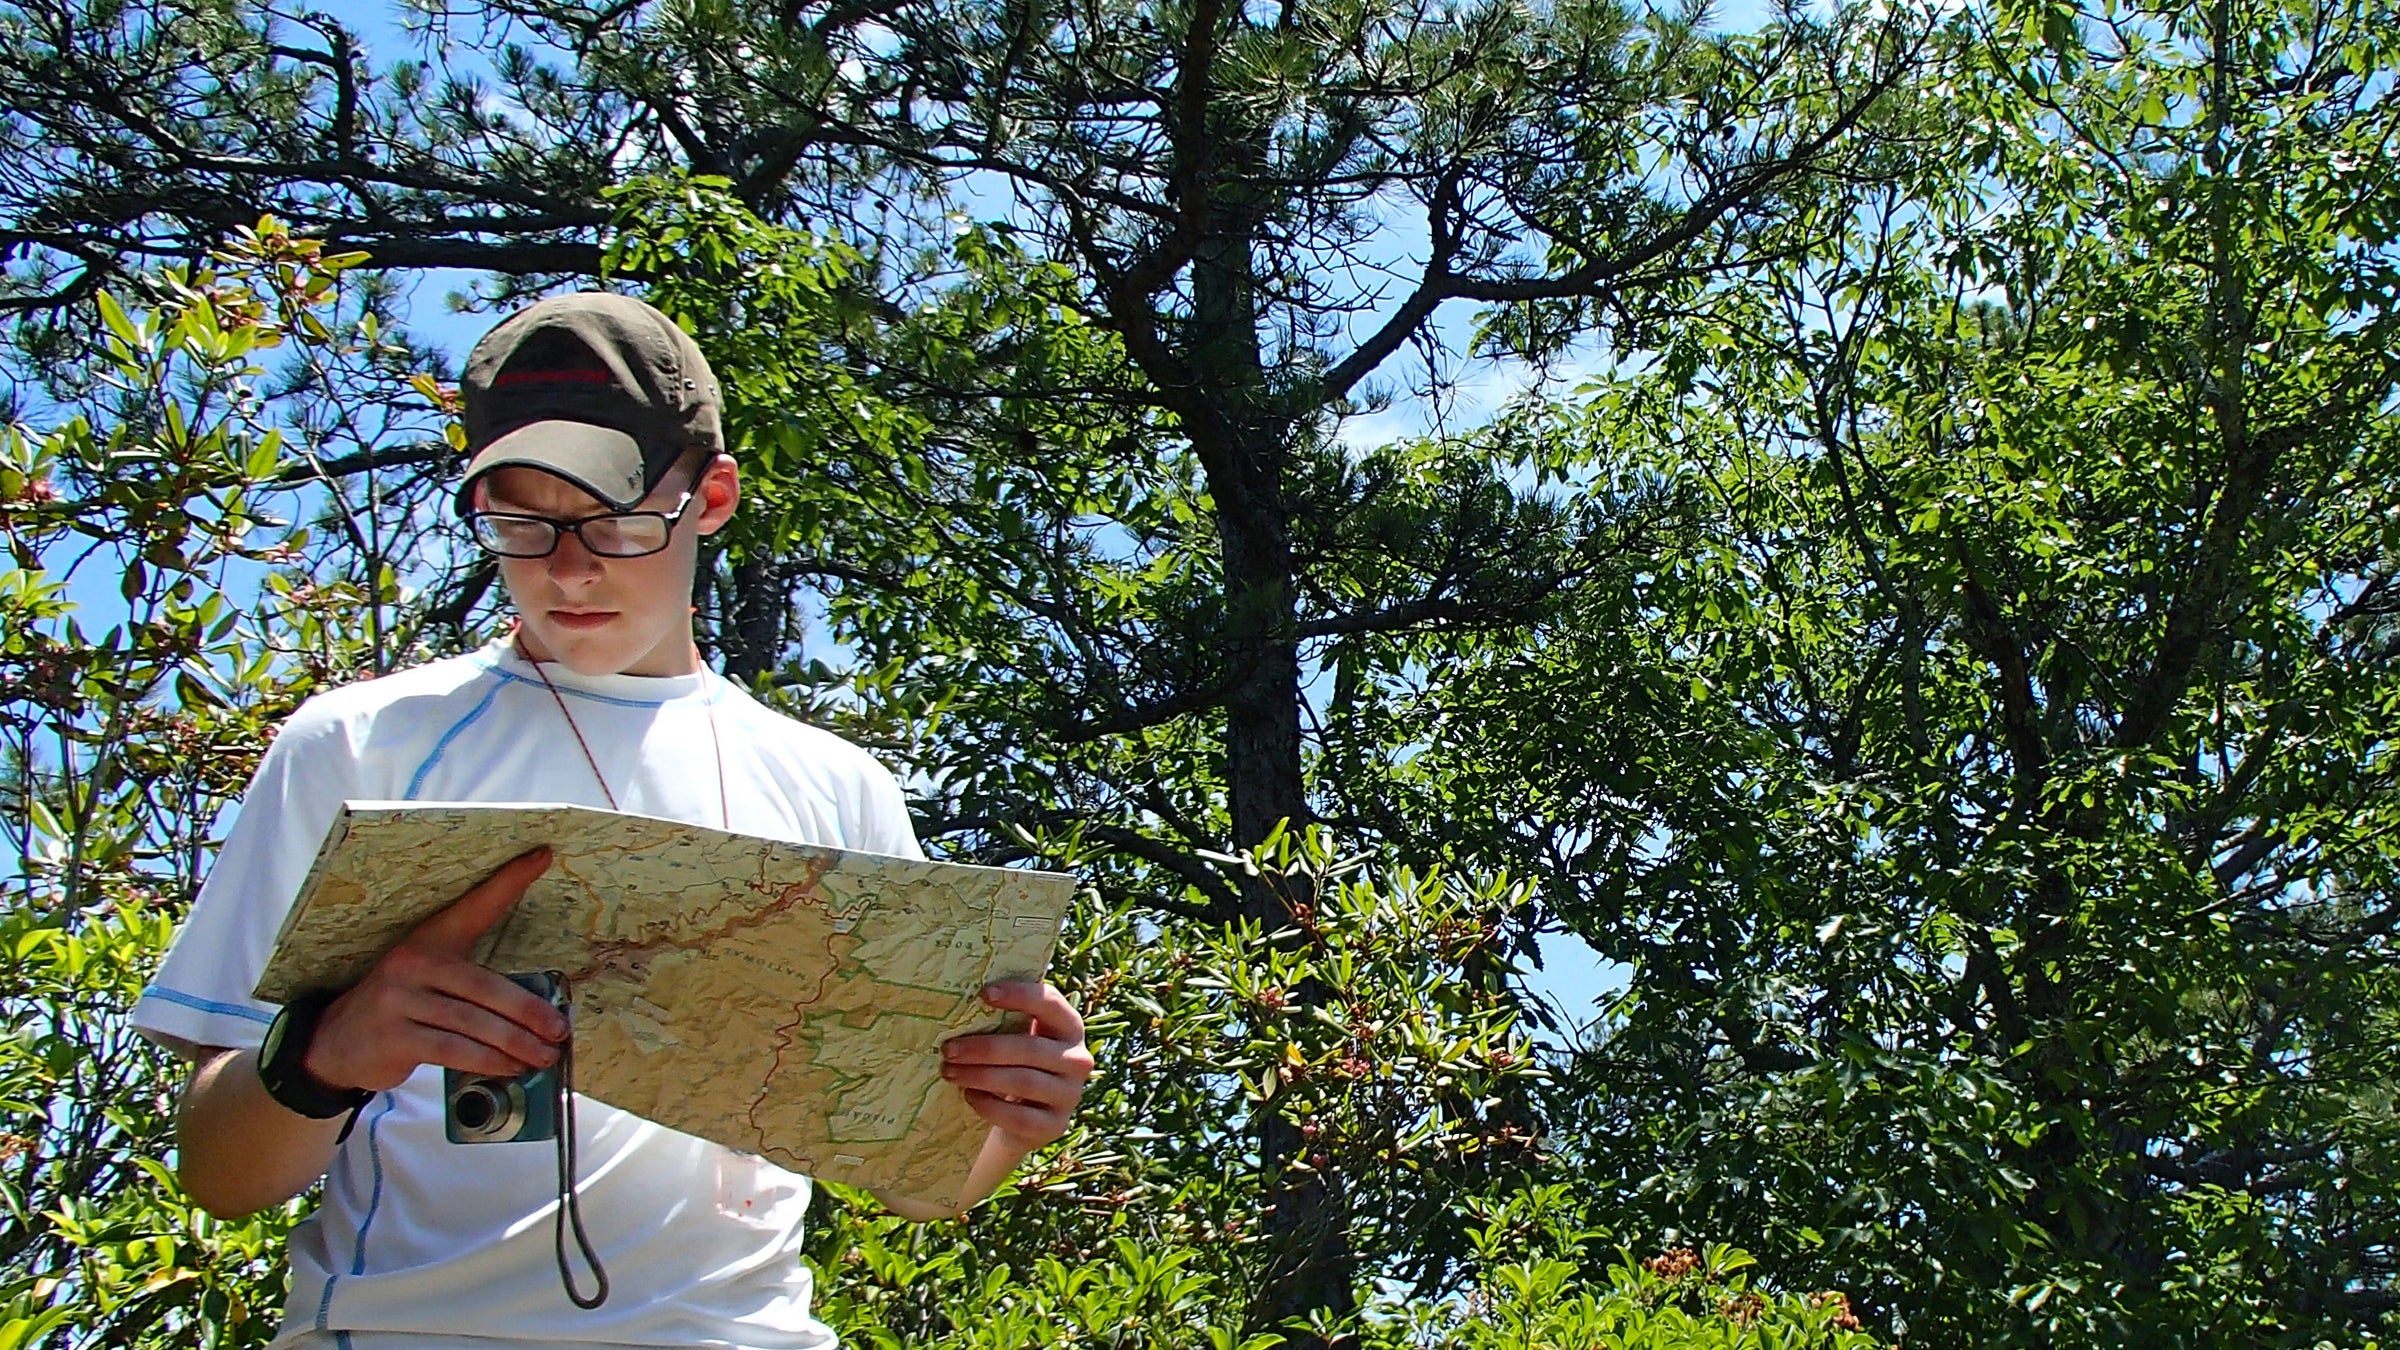 A hiker uses a compass to navigate through the woods. What area of